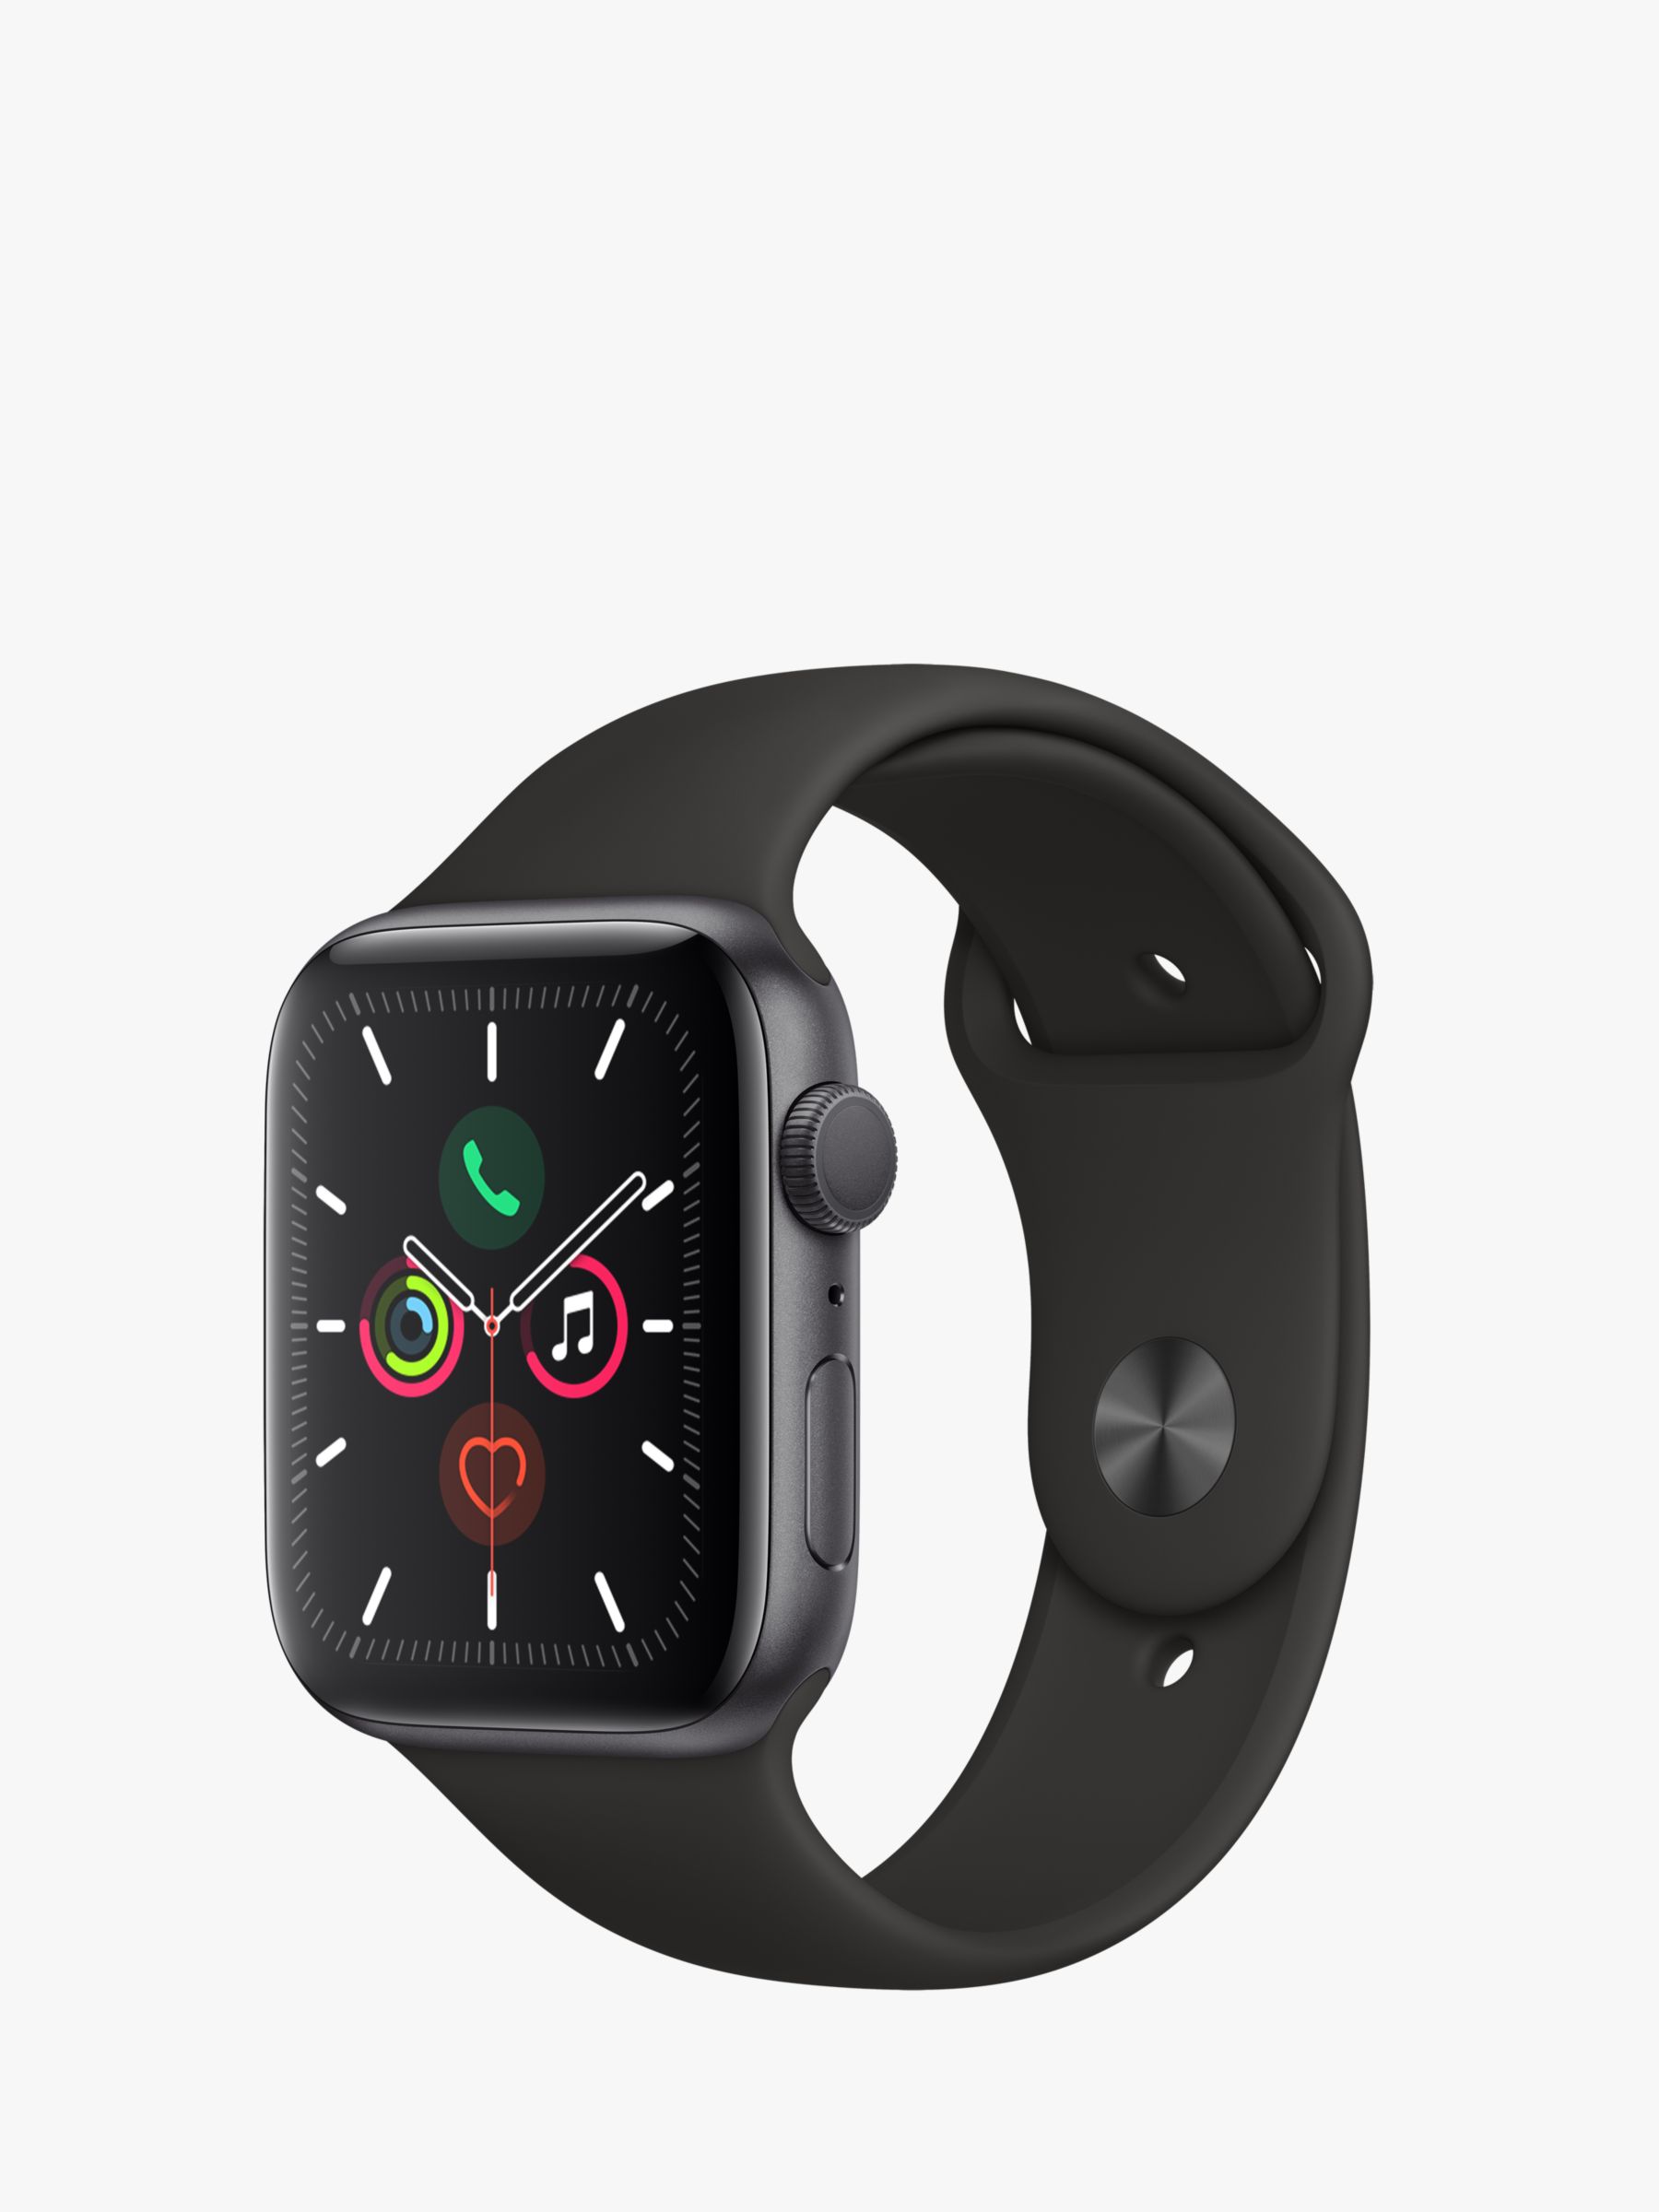  Buy Apple Watch Series 5 (GPS, 44mm) - Space Gray Aluminium Case  with Black Sport Band Online at Low Prices in India